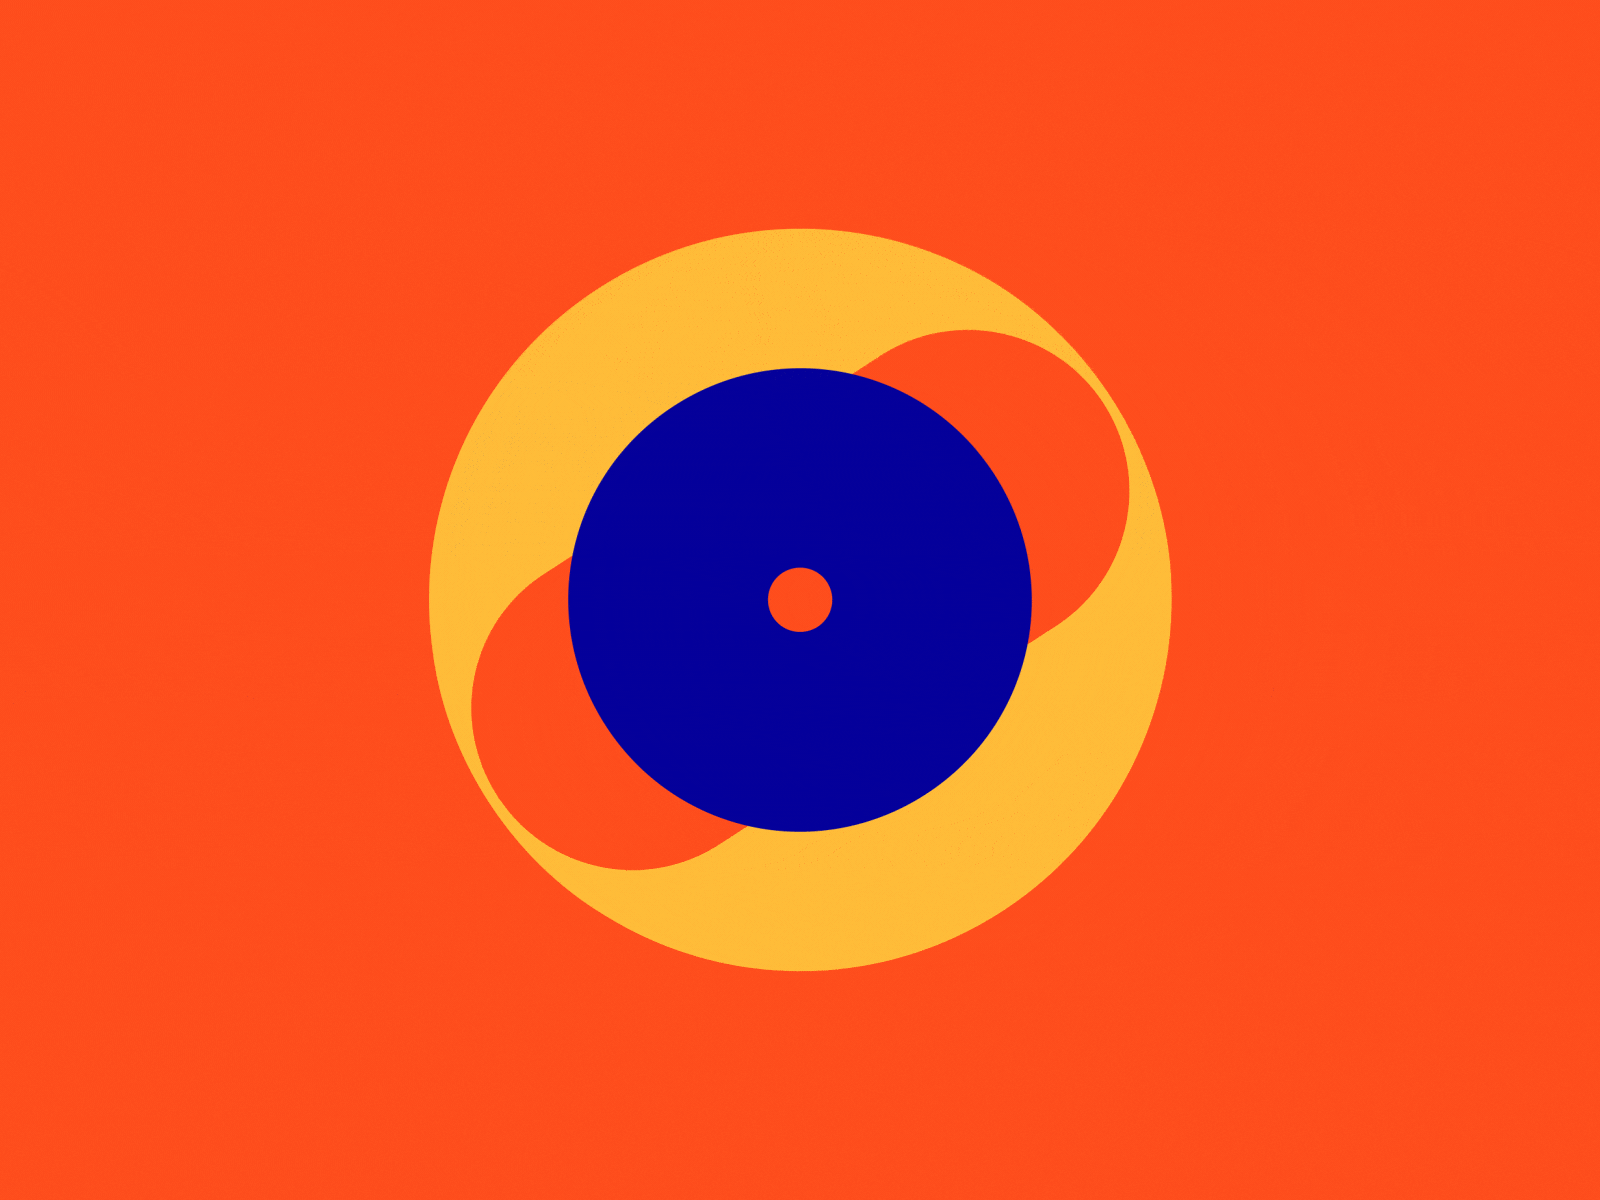 36 Days of Type - O 36 days of type 36daysoftype 36daysoftype08 36dot ae after effects animated type animation animography colors design kinetic kinetic type kinetic typography motion motion design motion graphic motion graphics type typography